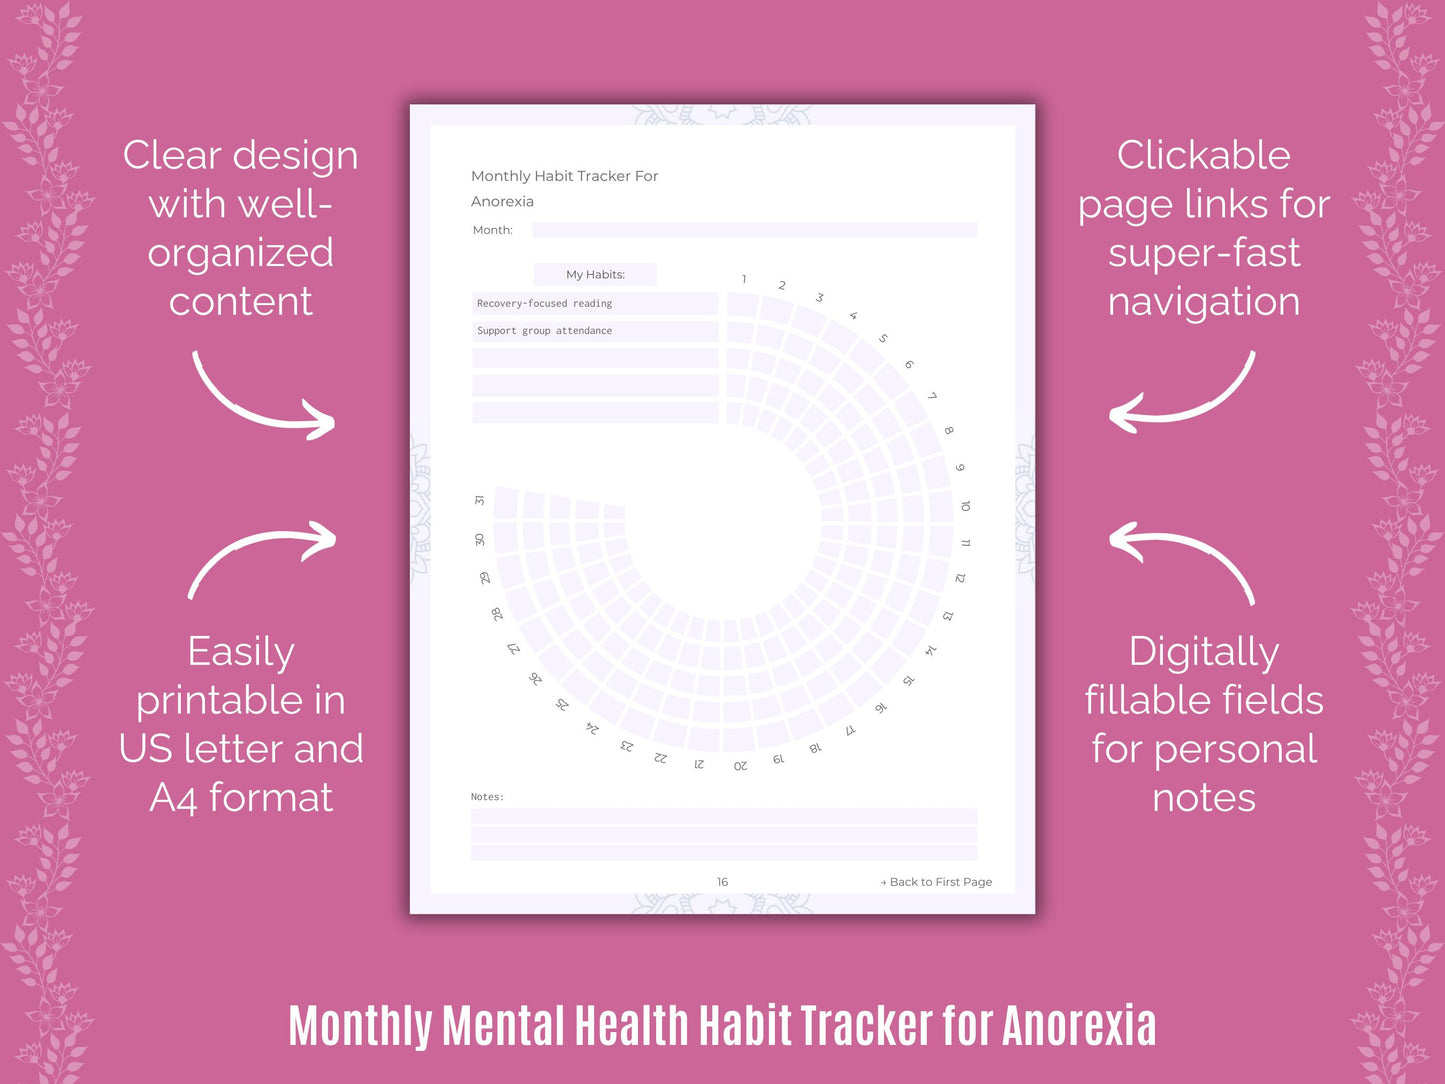 Anorexia Journaling, Anorexia Counseling, Anorexia Notes, Anorexia Tools, Anorexia Therapy, Anorexia Mental Health, Anorexia Planners, Anorexia Journals, Anorexia Workbooks, Goal Setting, Anorexia Resources, Anorexia Cheat Sheet, Anorexia Templates